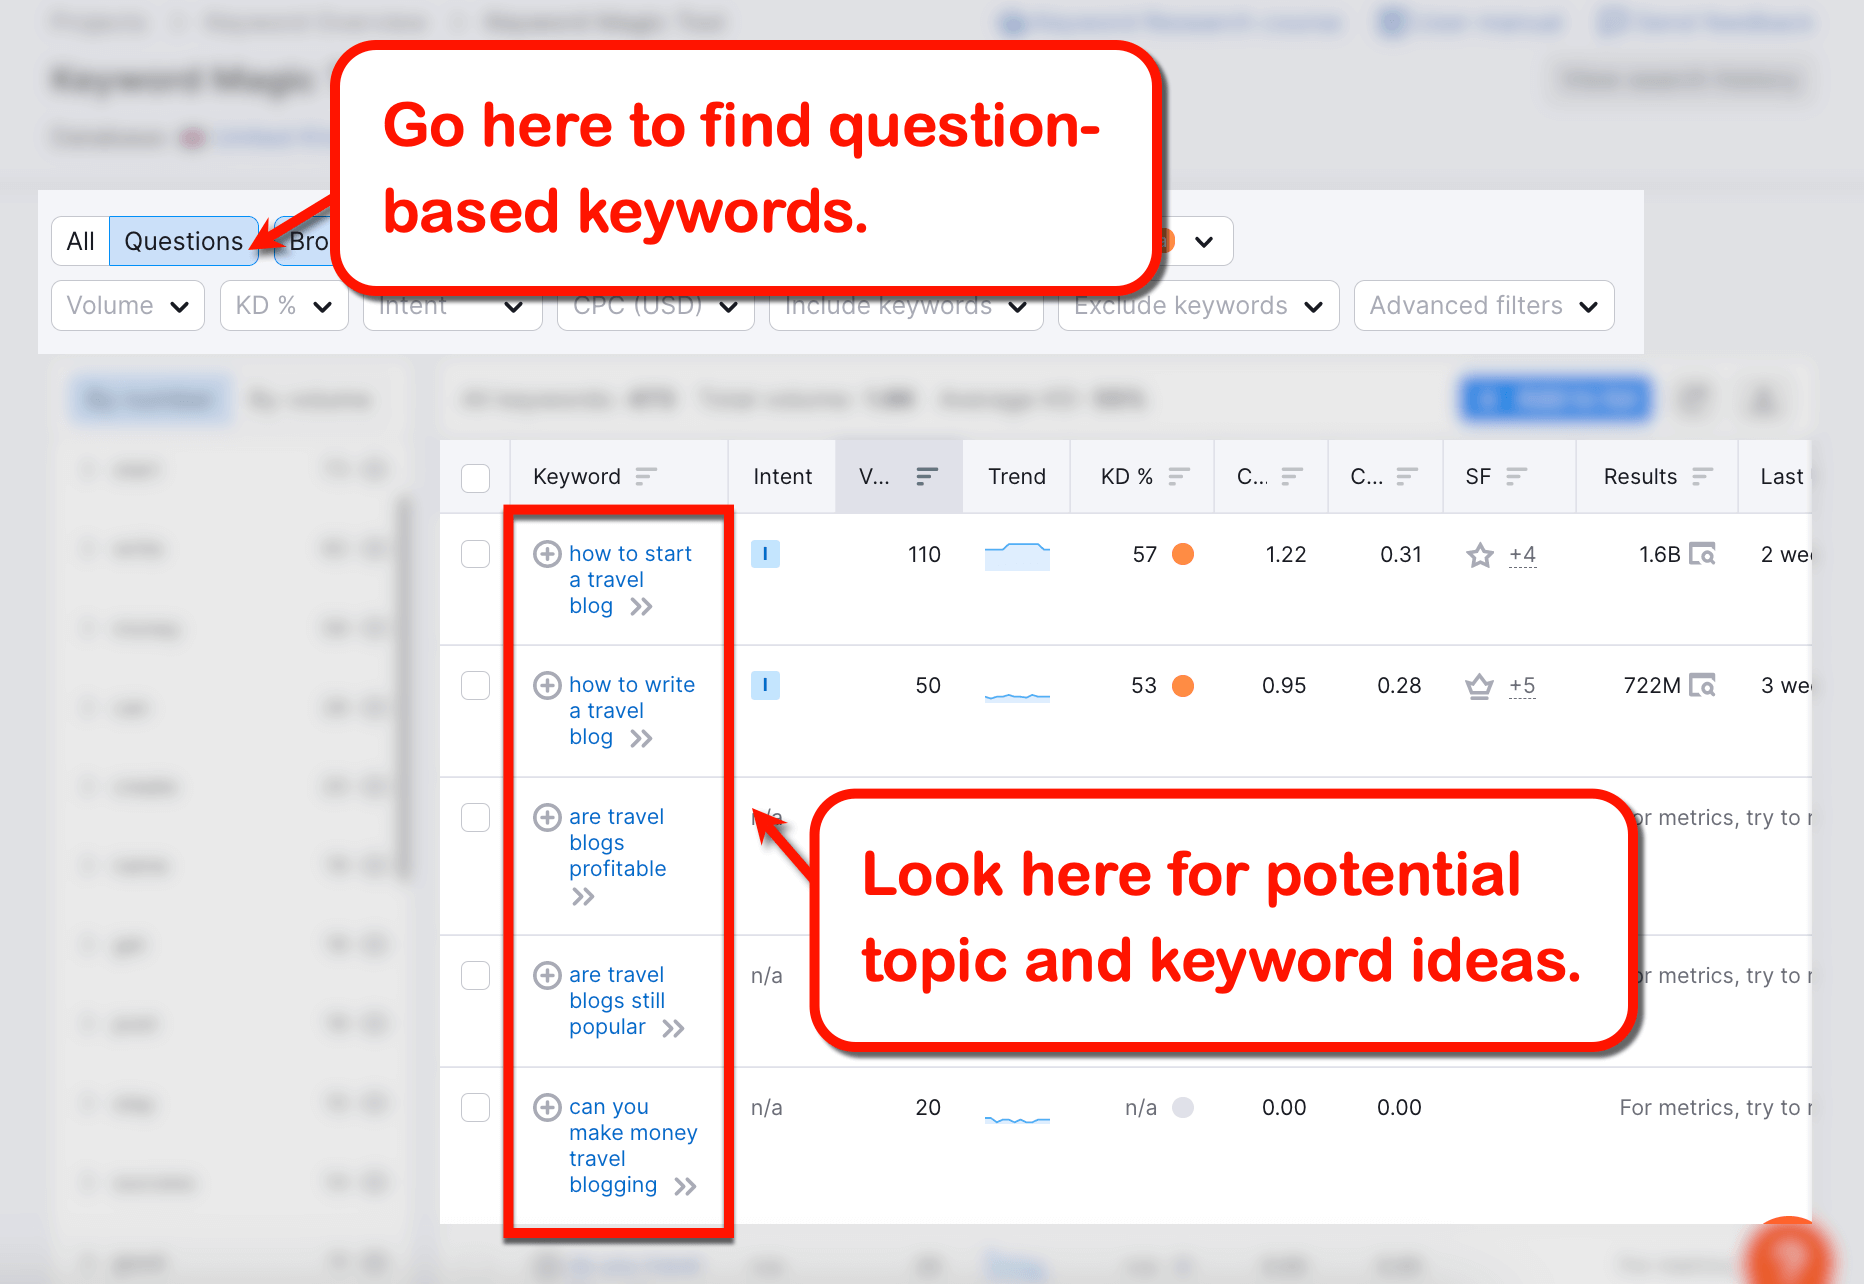 Look for potential topic and keyword ideas.